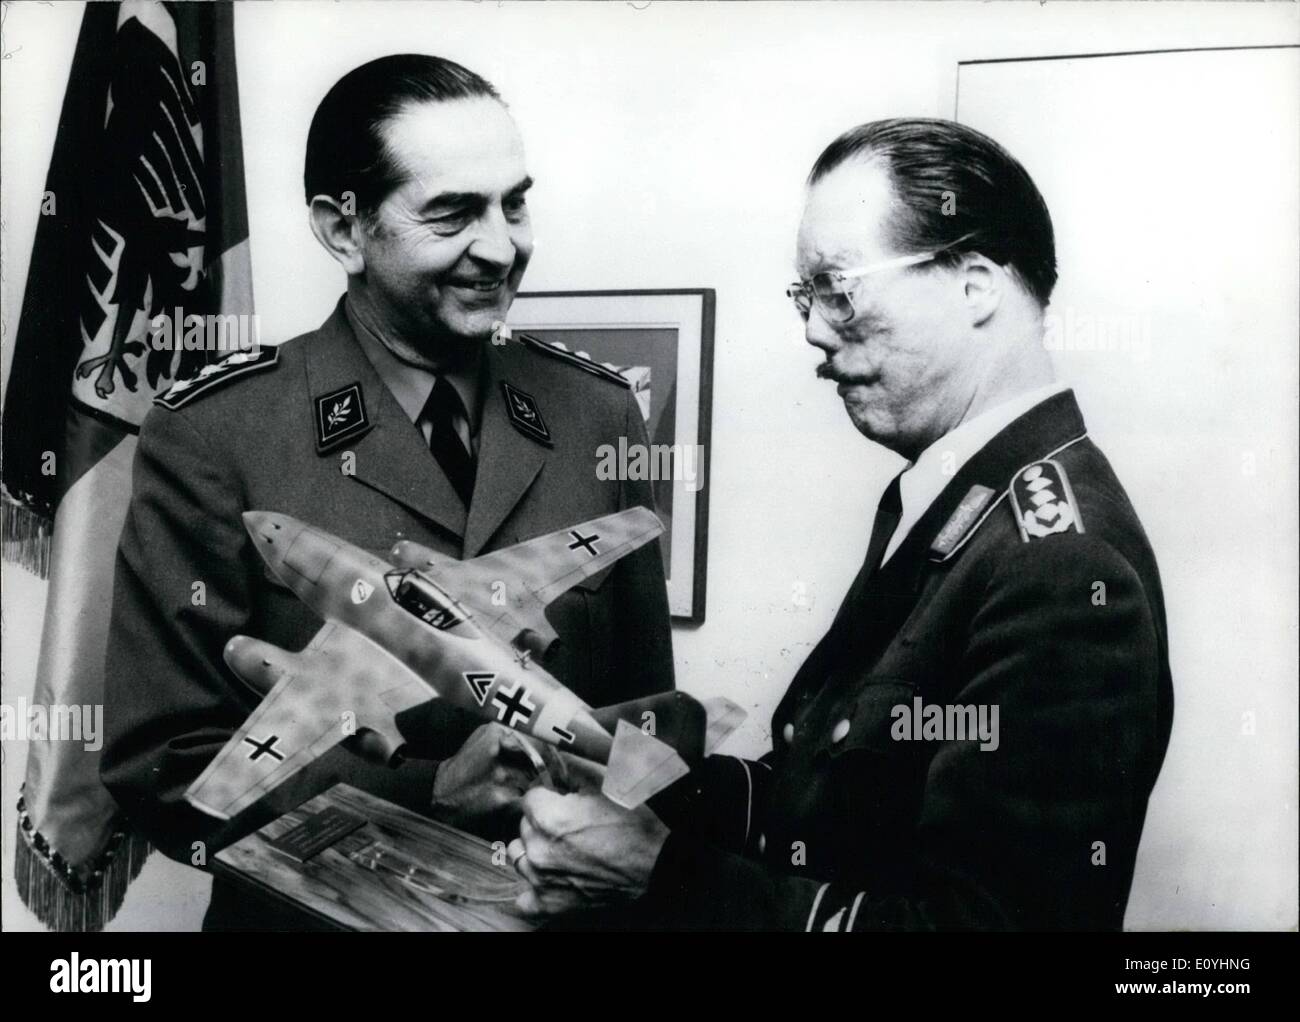 Jun. 06, 1970 - Visit of the commander-in-chief of the Swiss Air Force to Bonn: The Swiss chief corps commander Dr. Eugen Studer (l.) has been given a model of a Me 262 (first jet-fighter in the world) by the Chief of Staff of the Federal Air Force, lieutenant general Johannes Steinhoff, in memory of his visit to the Federal Republic of Germany. The guest from Switzerland stayed in the Federal Republic of Germany for some days, on invitation of lieutenant general Steinhoff and there inspected units of the Federal Air Force. Stock Photo